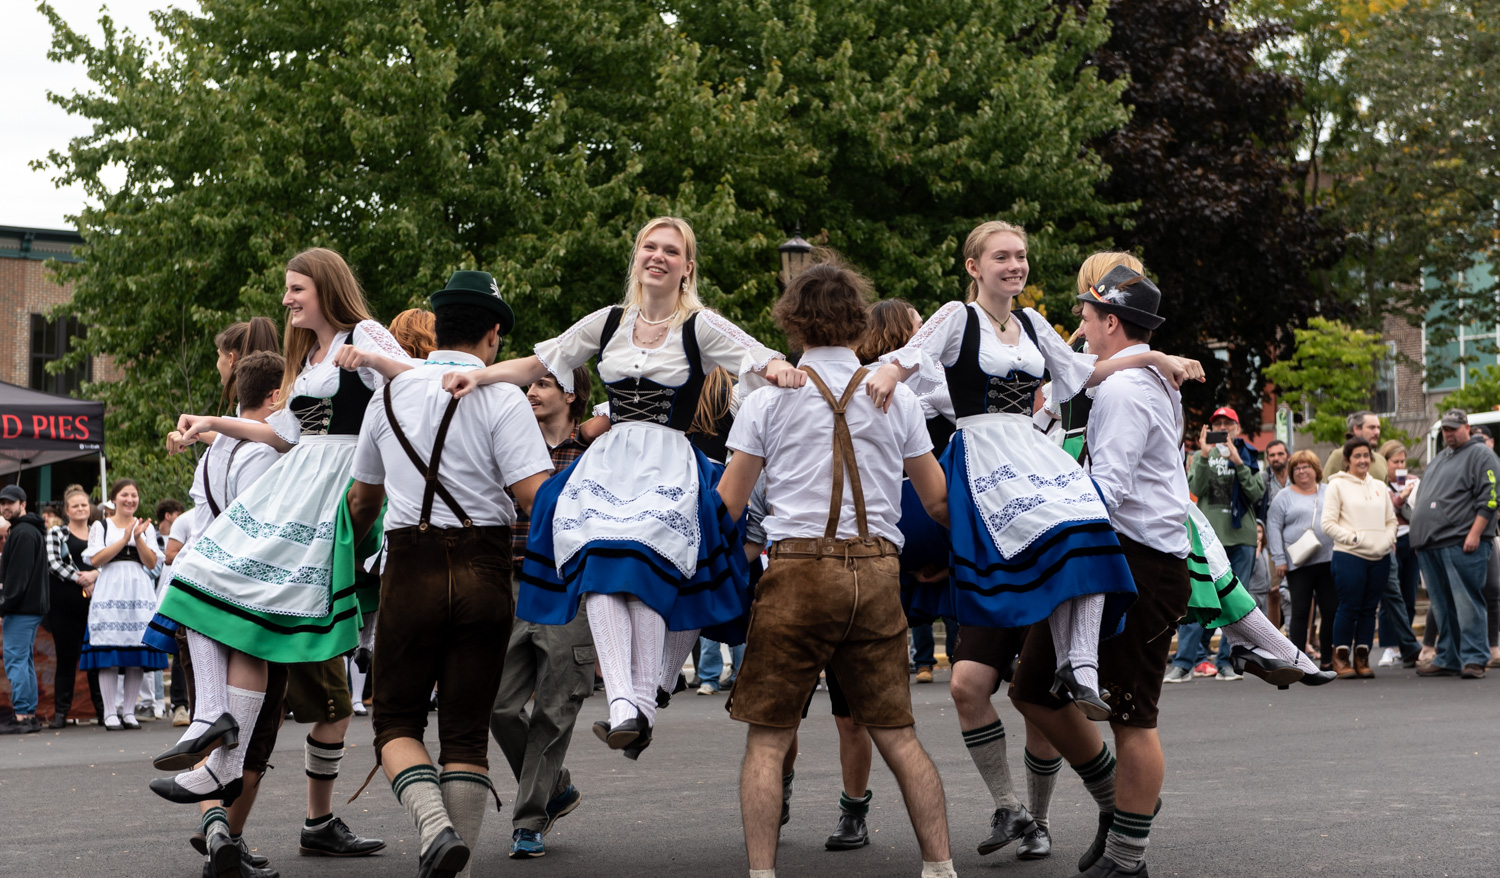 Kent’s 2022 Oktoberfest brought food, live music and culture to